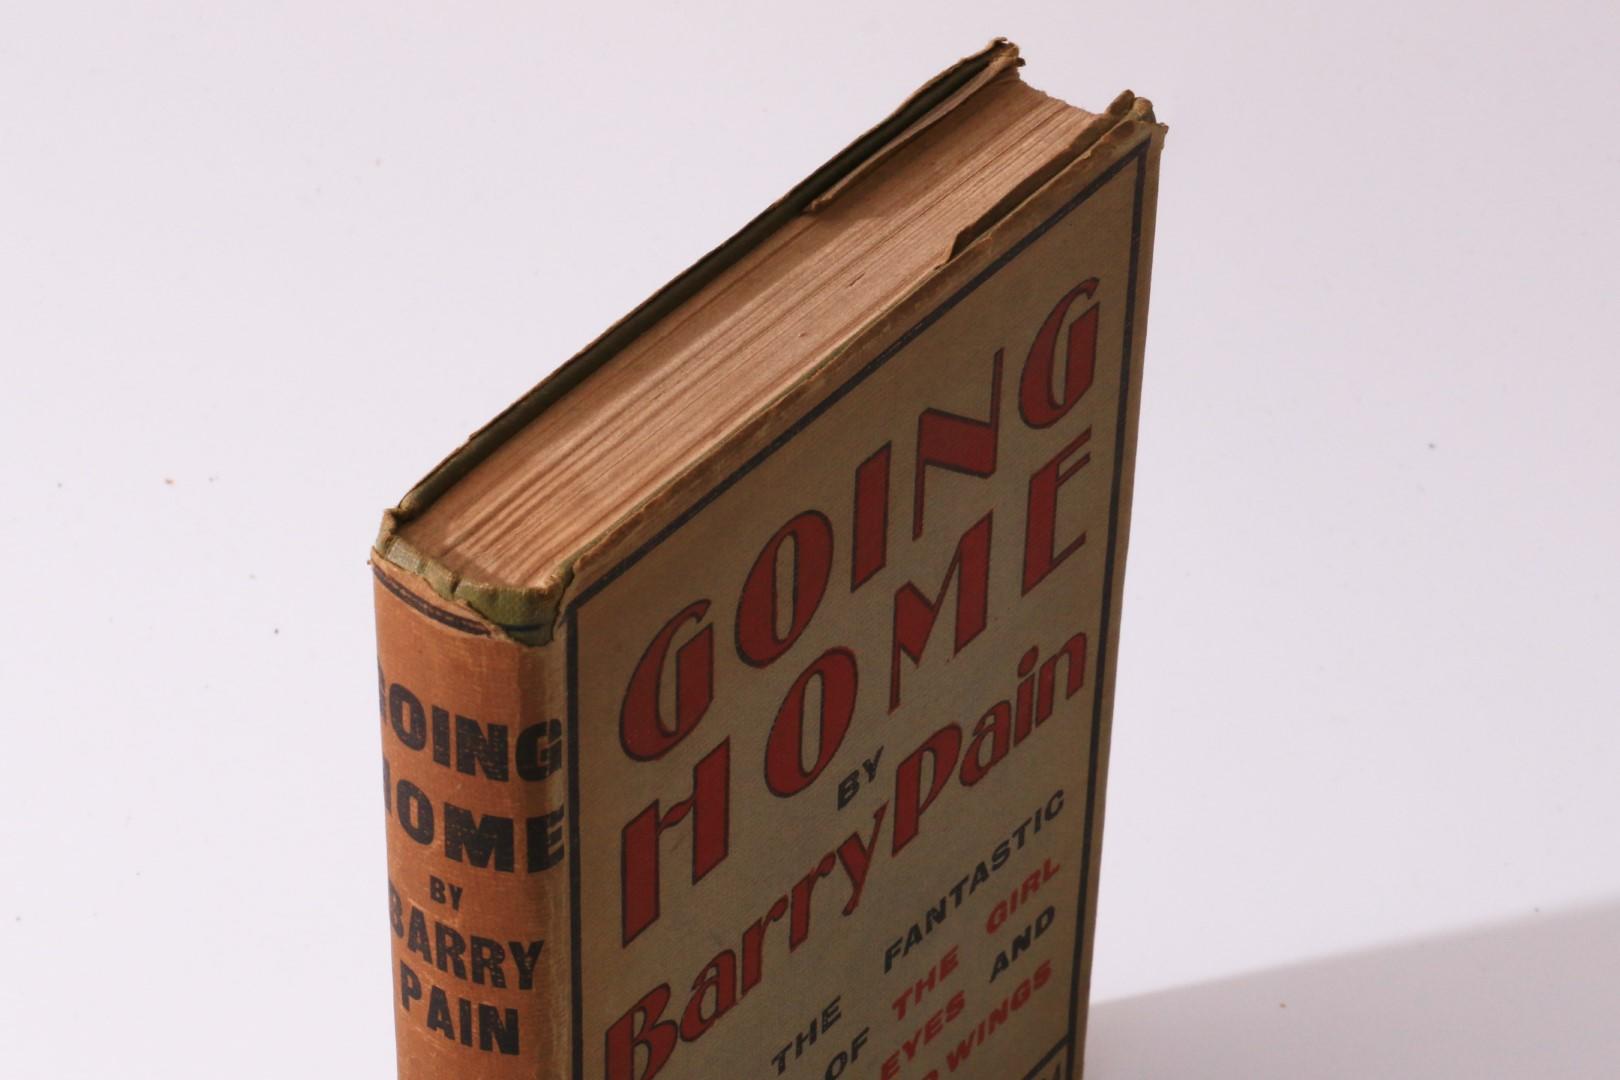 Barry Pain - Going Home: Being the Fantastical Romance of the Girl with Angel Eyes and the Man who had Wings - T. Werner Laurie, n.d. [1921], First Edition.